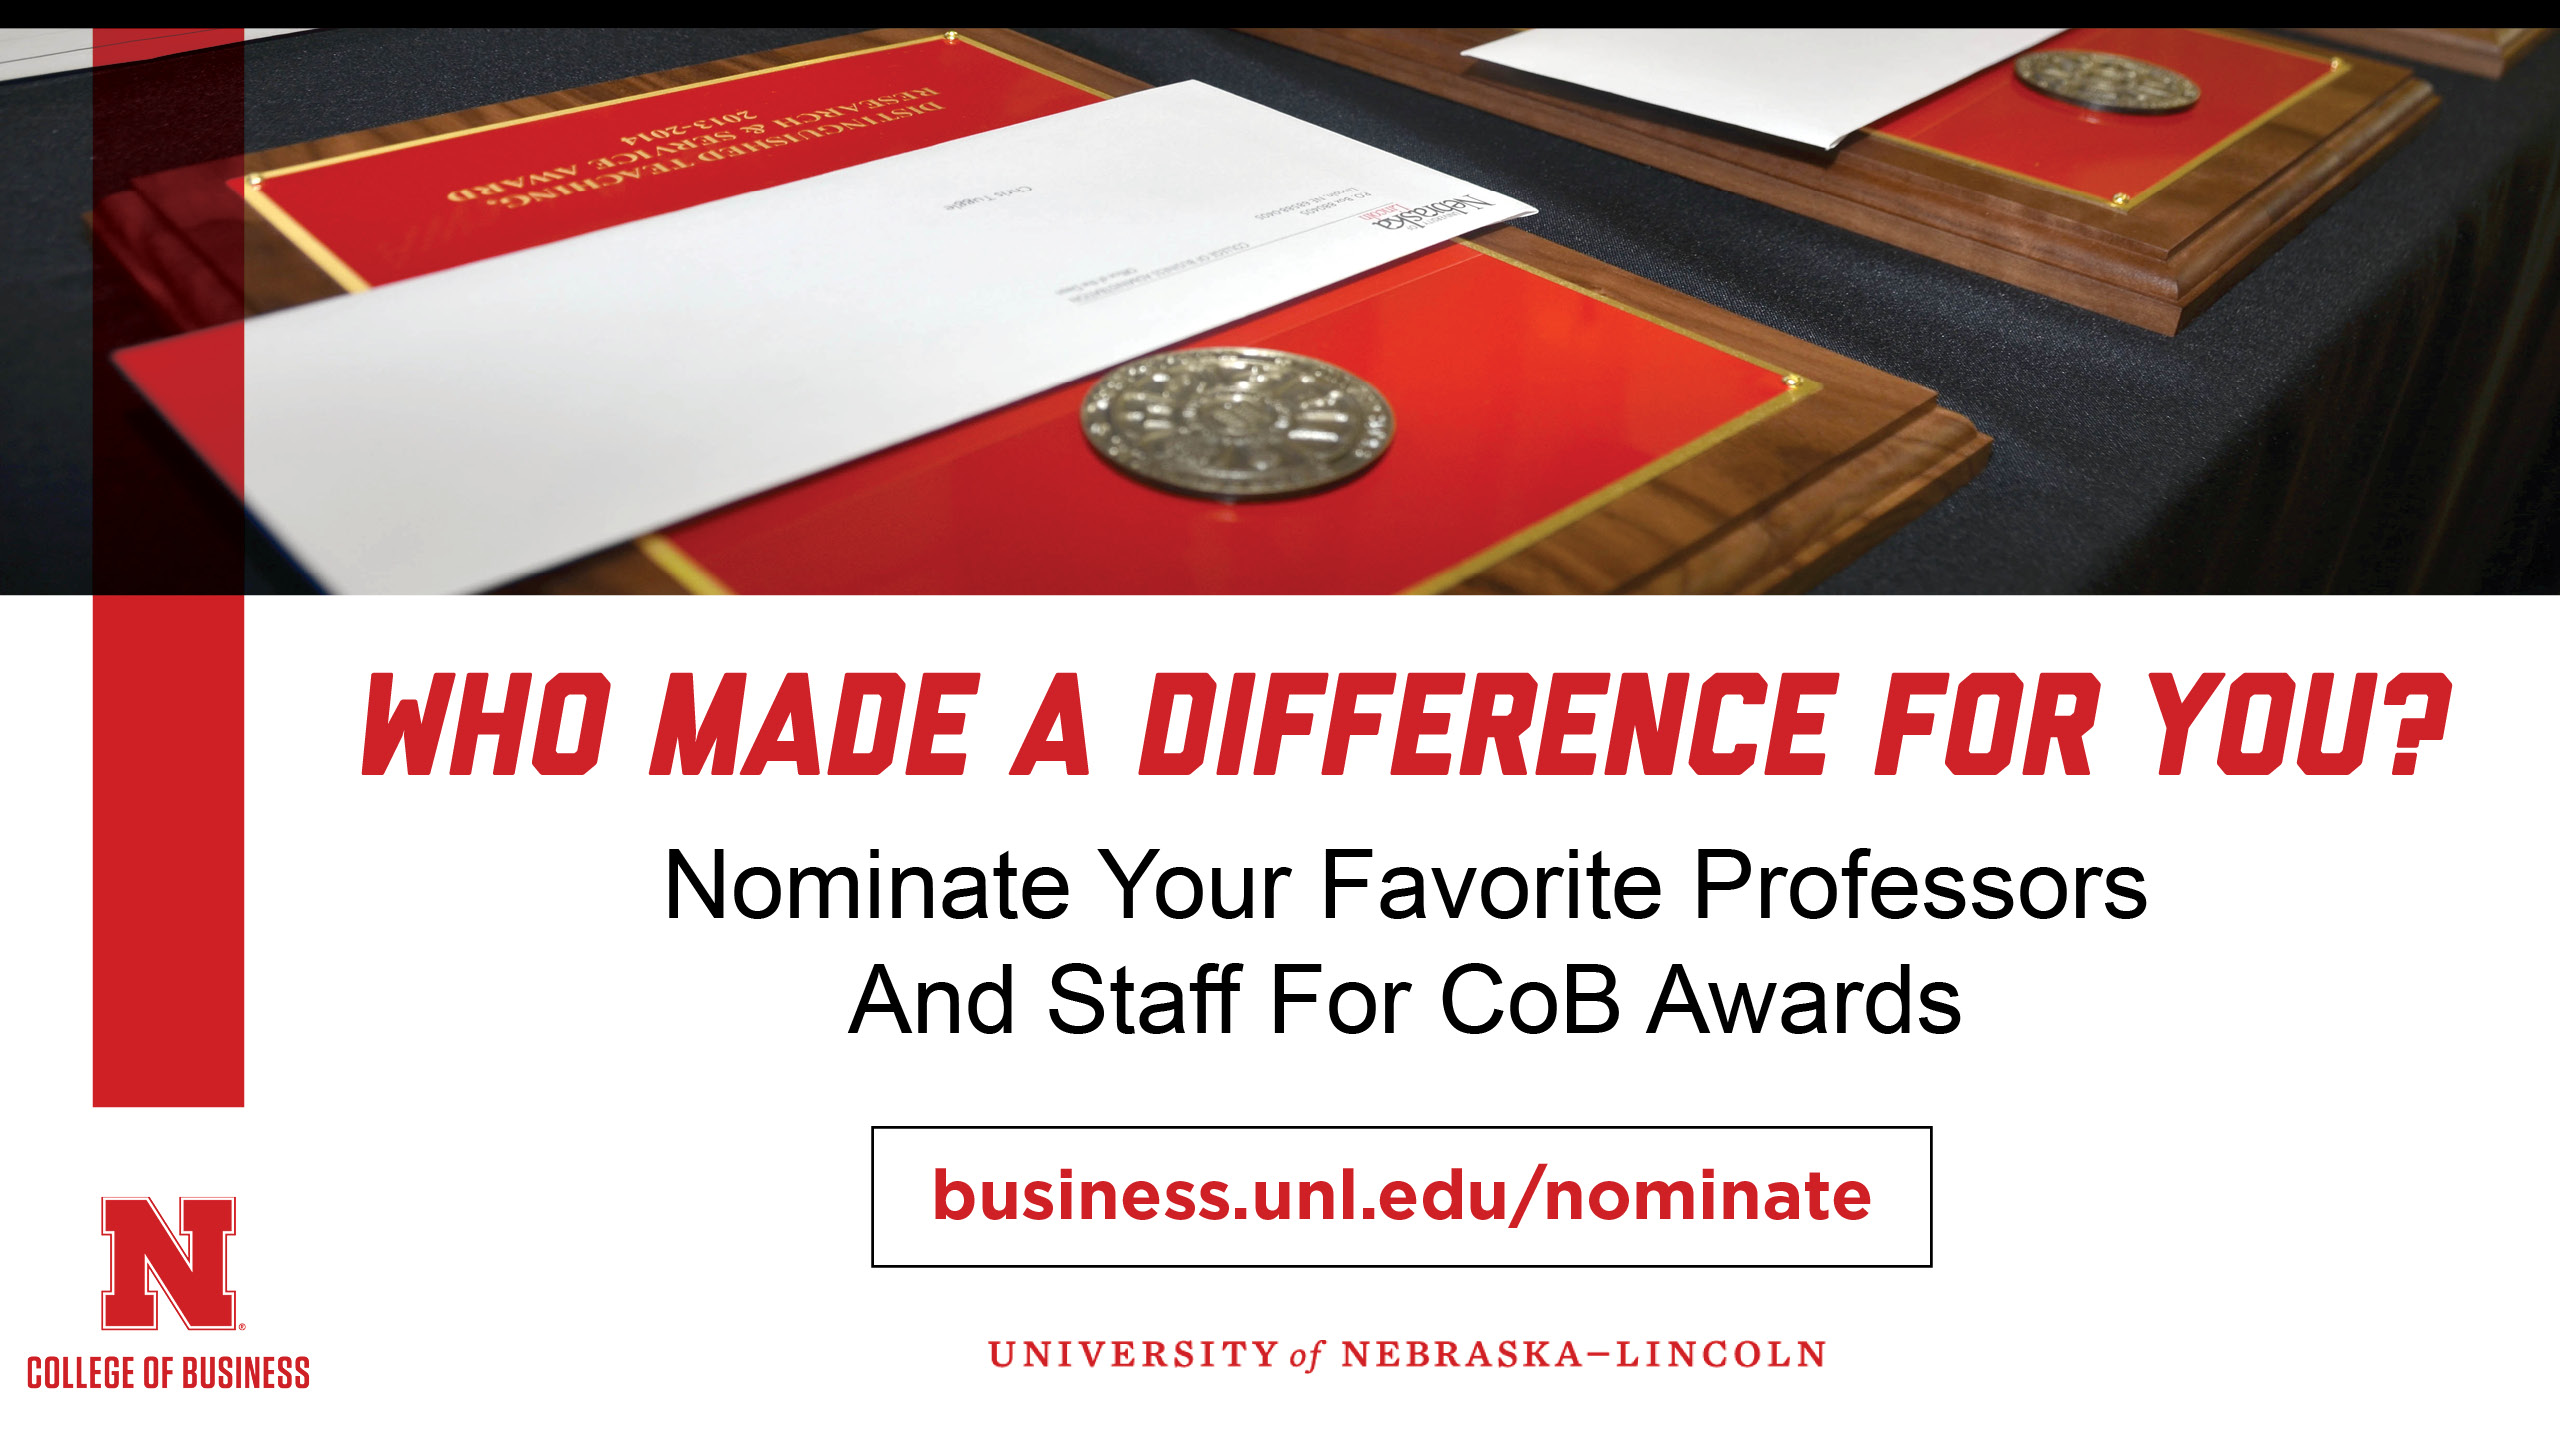 Nominate your favorite Professors and Staff for CoB Awards!